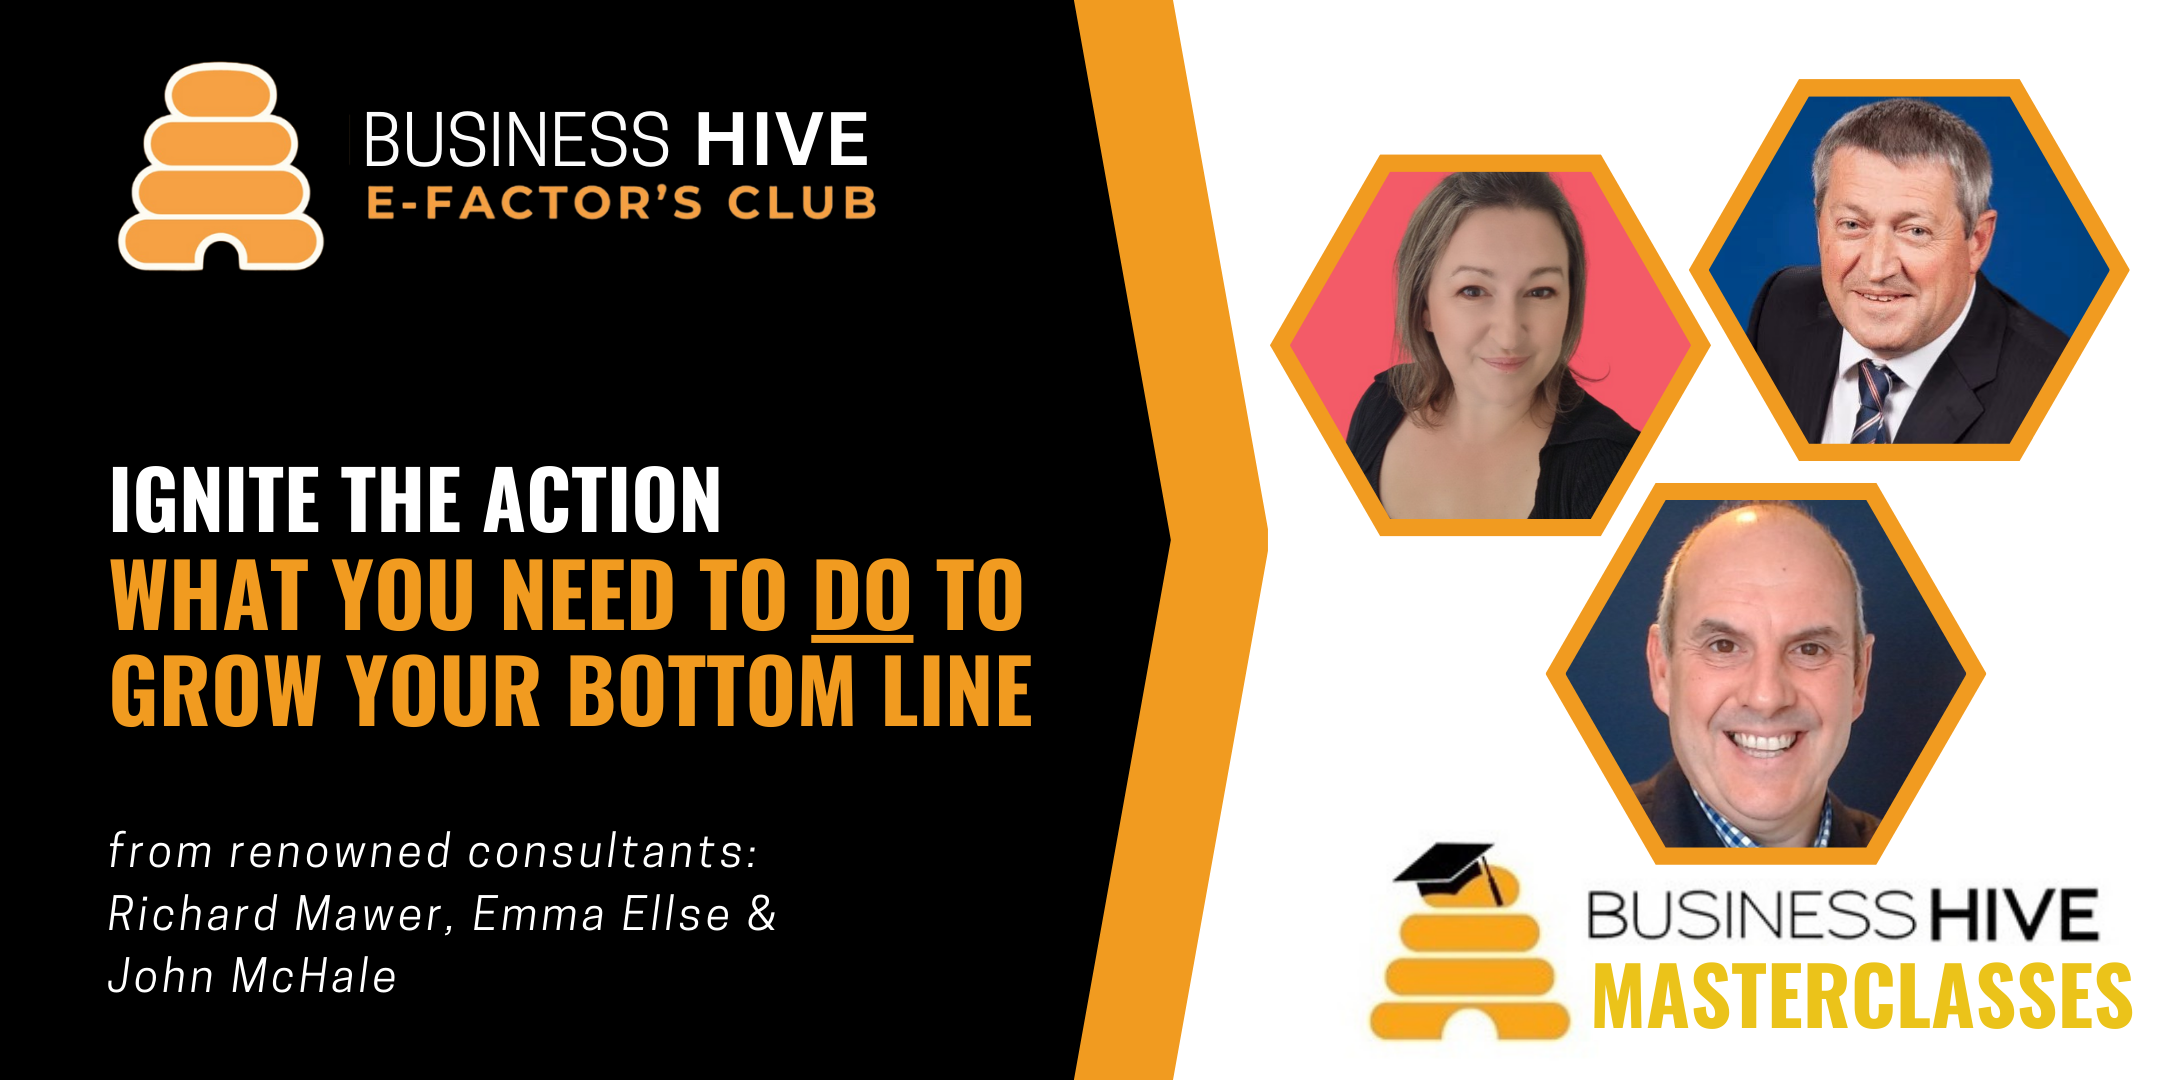 Promotional banner for business hive e-factor's club event, featuring consultants Richard Mawer, Emma Ellse, and John McHale with the caption "Ignite the Action: What You Need